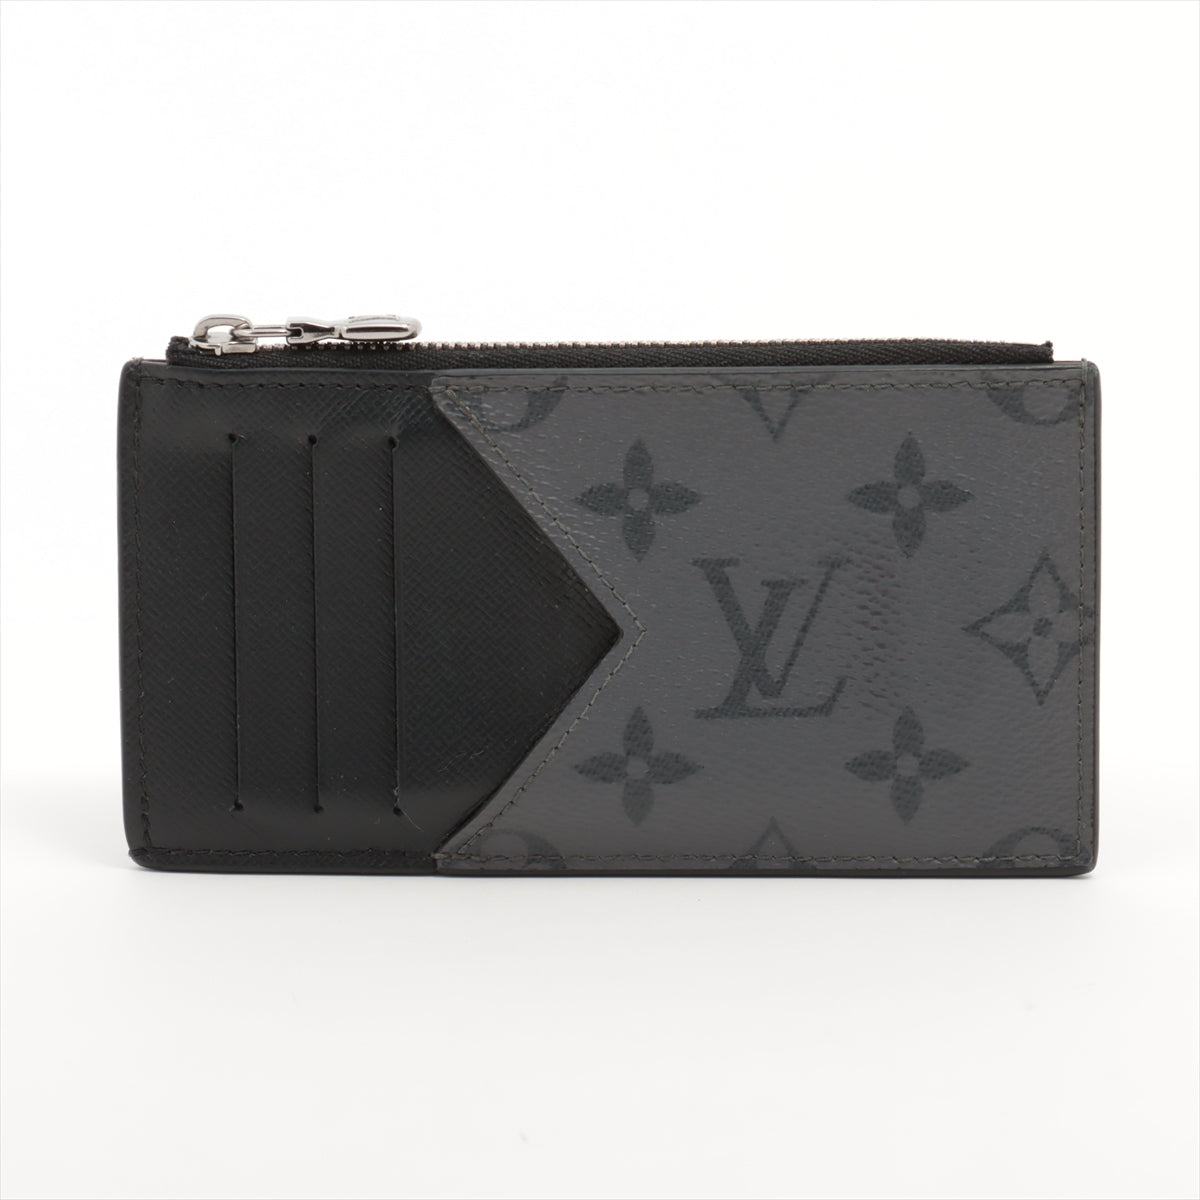 bicmbicmLOUIS VUITTON コインケース エクリプス コンパクト コイン カード